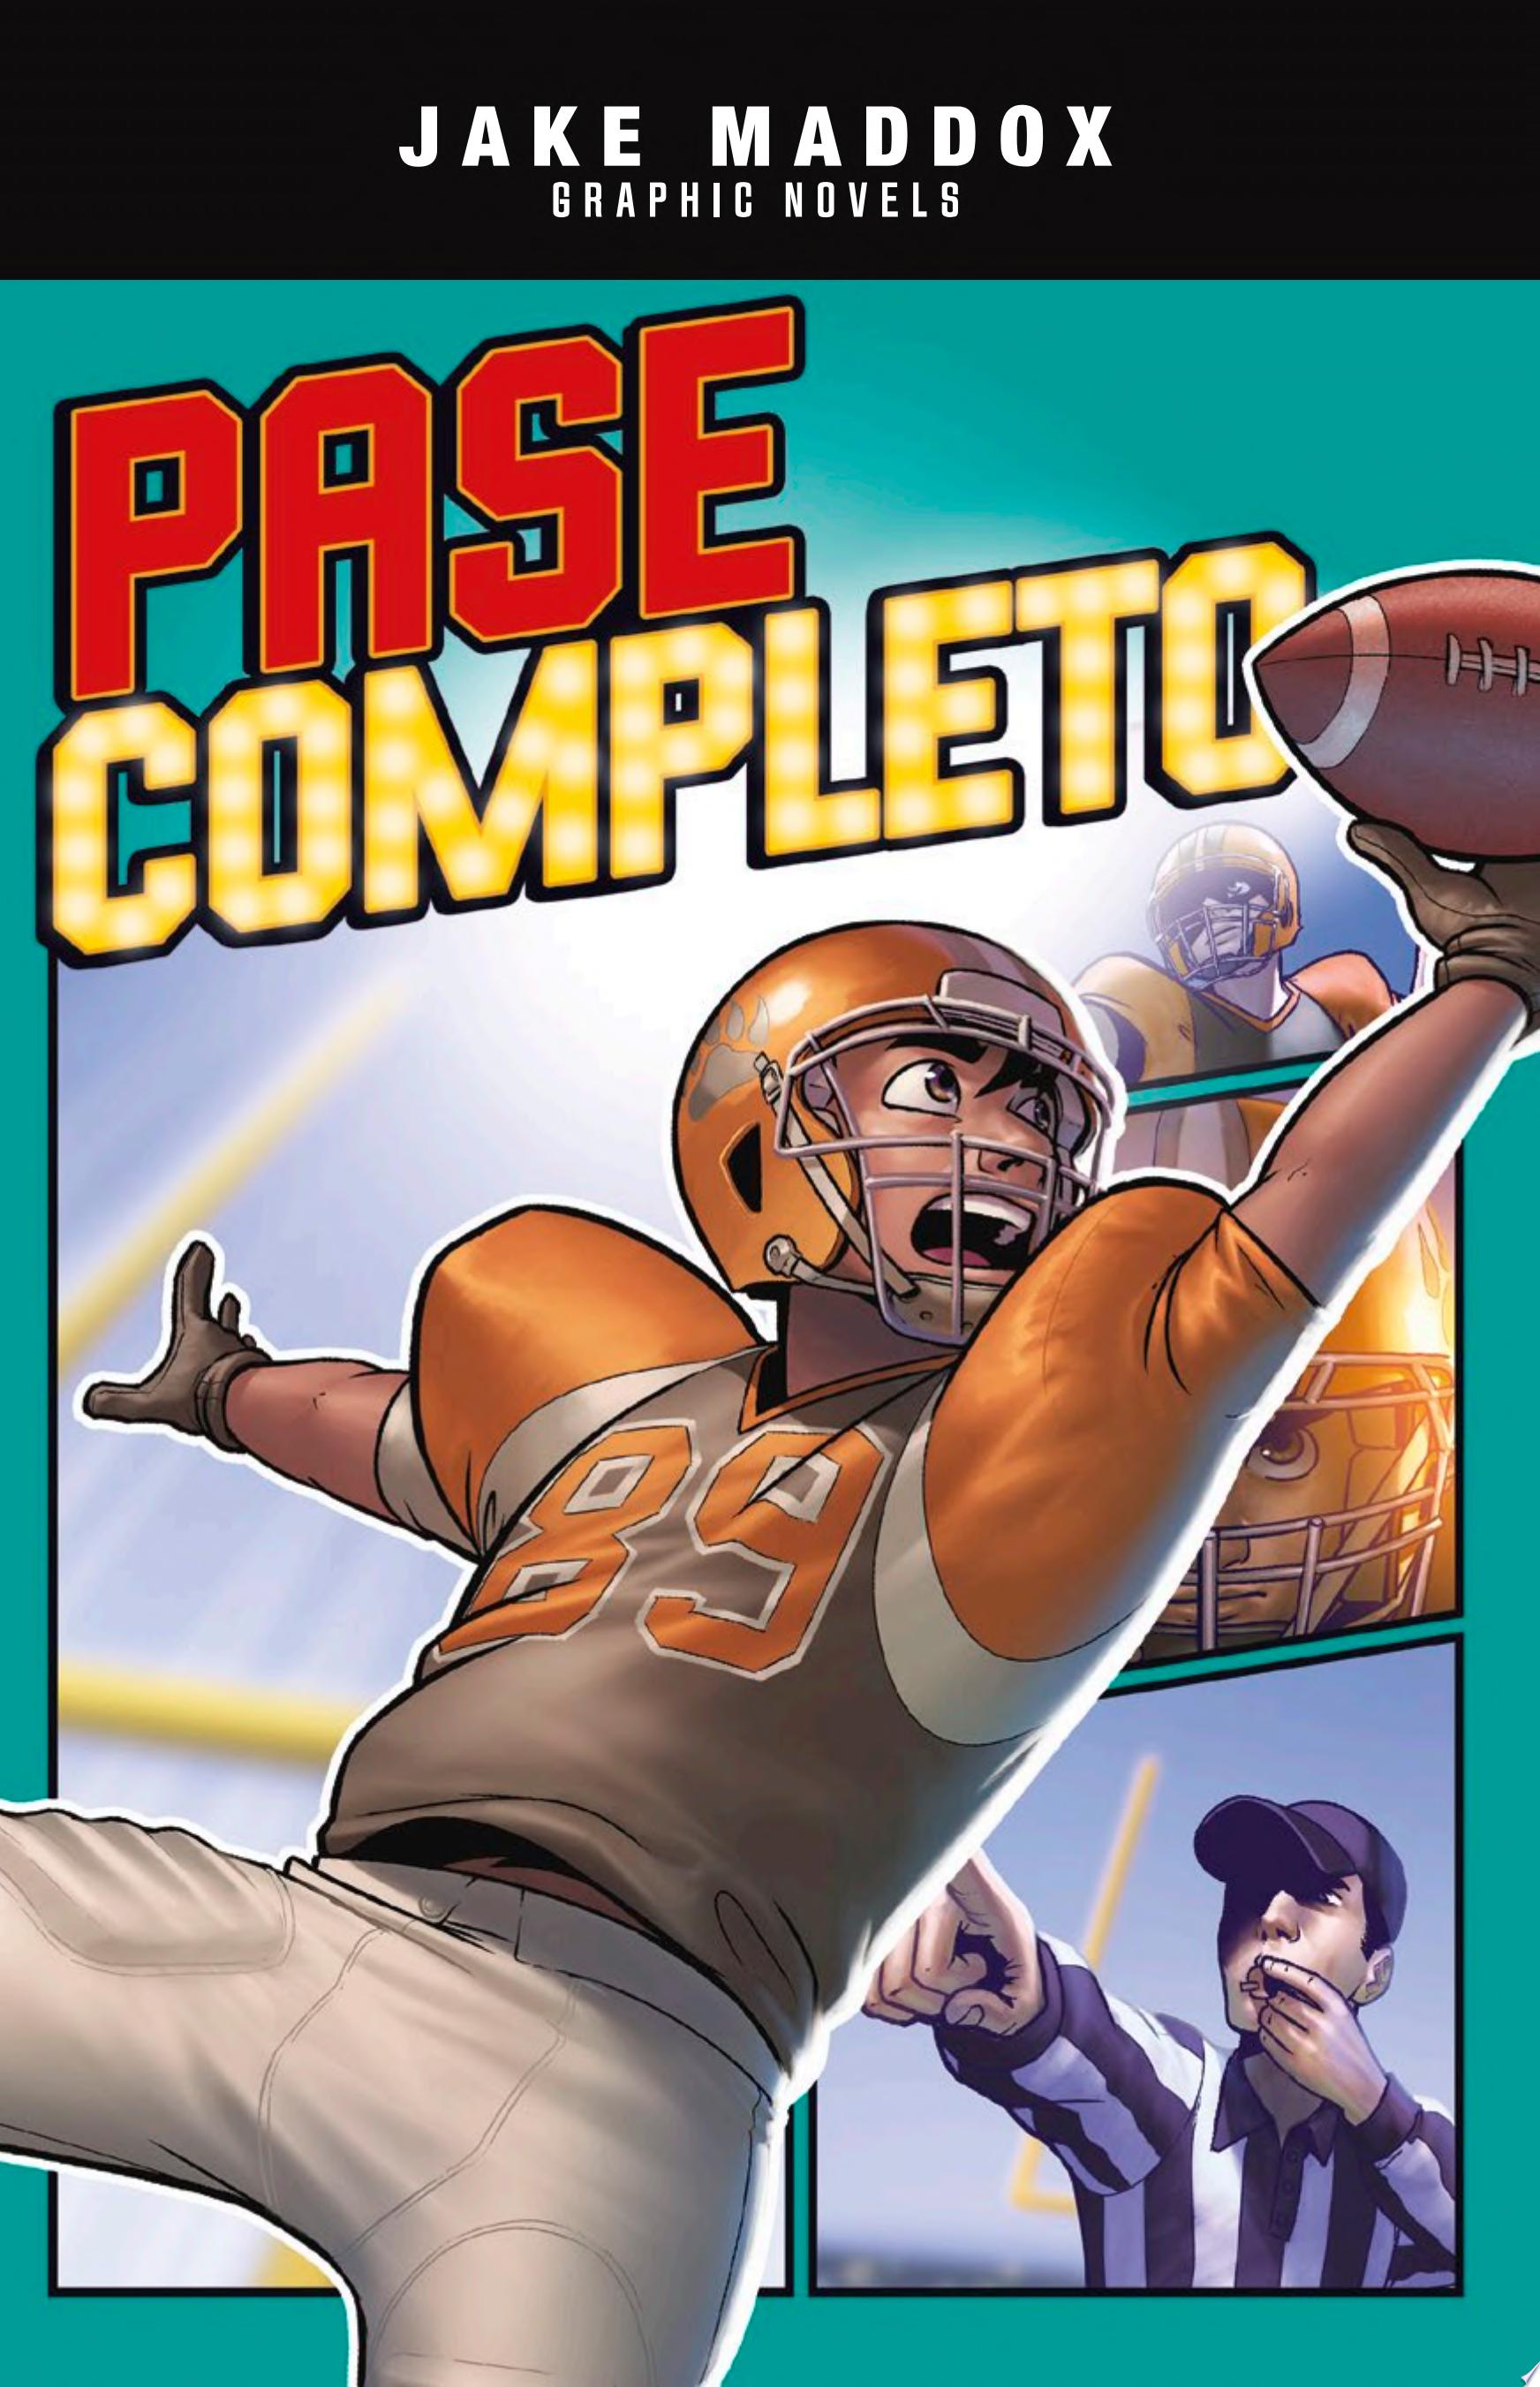 Image for "Pase Completo"